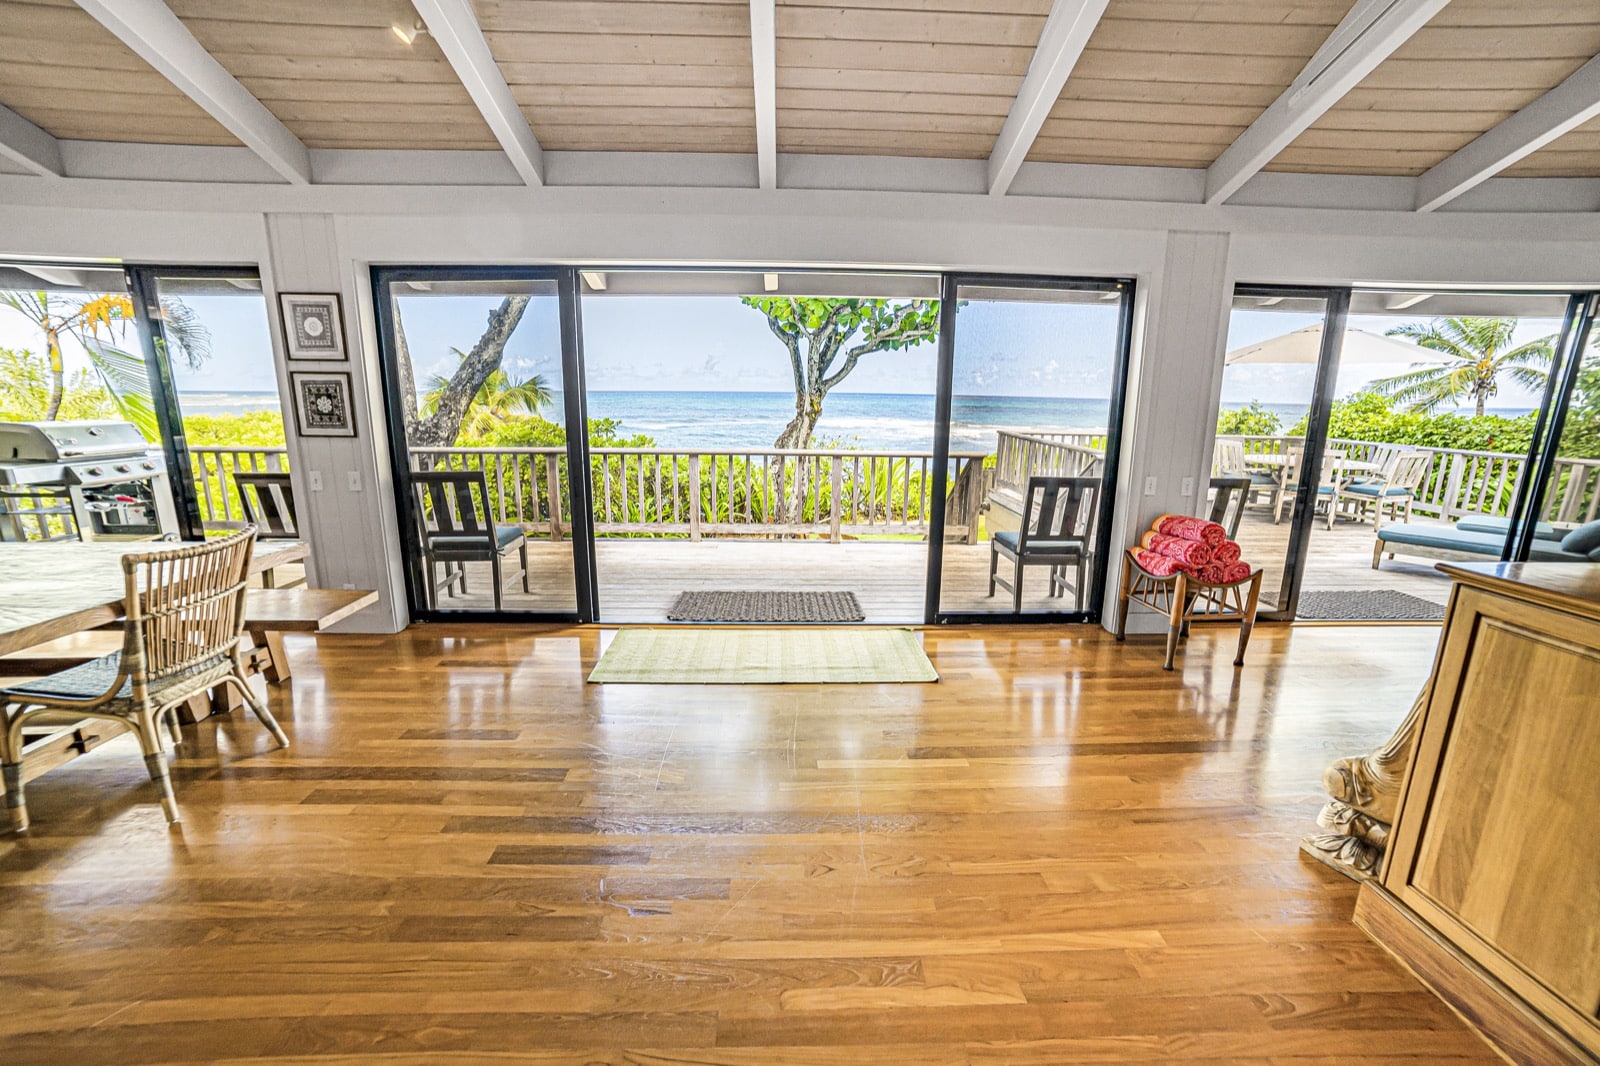 Living room and sliding glass doors looking out toward the ocean.